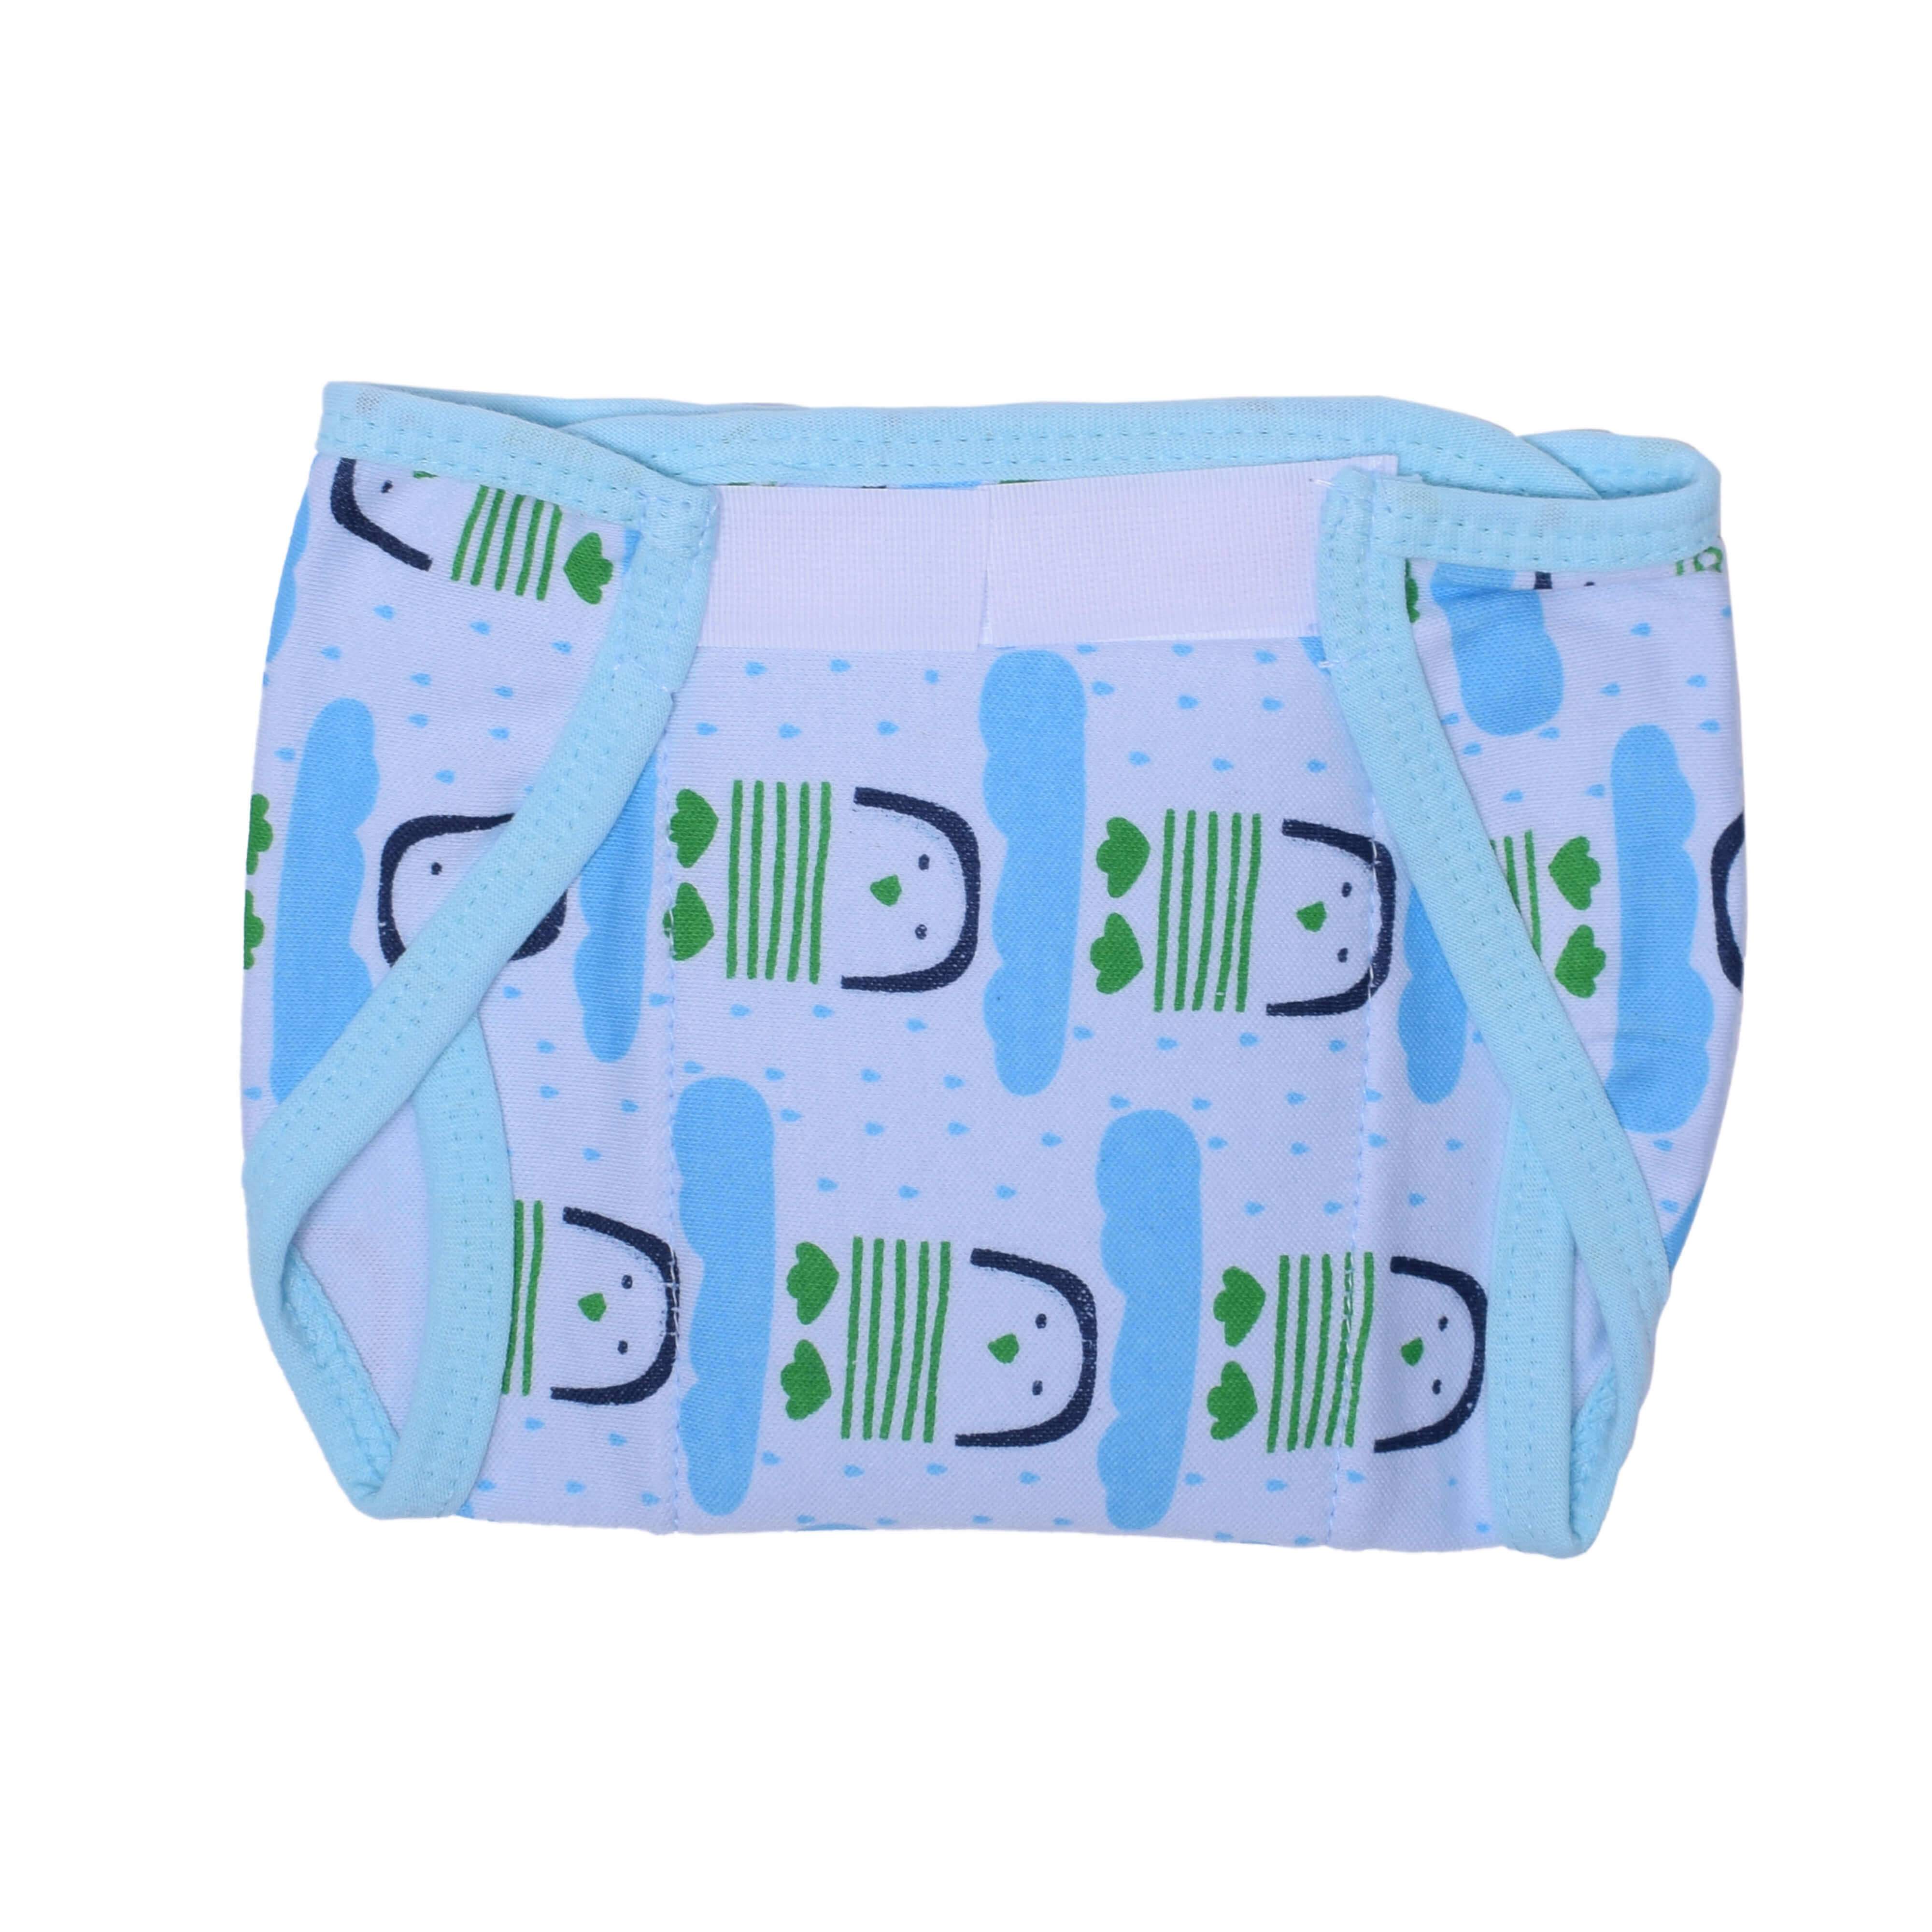 COZYCARE Washable Diapers Hosiery Velcro Penguin Print Blue, Green & House Print Pink 3P Set (SS)